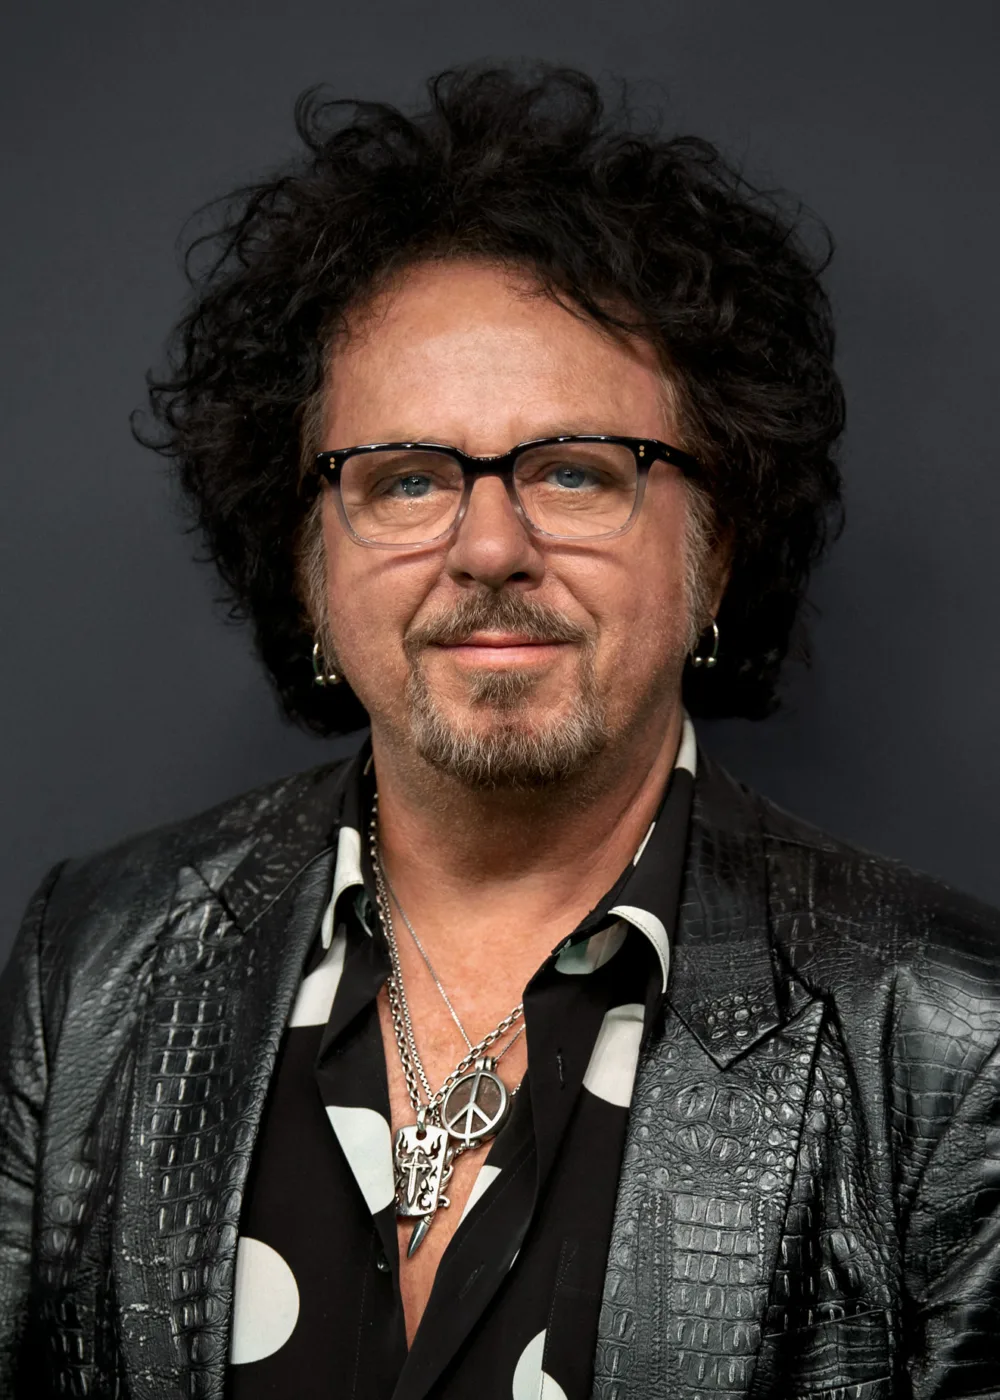 Steve Lukather is an American guitarist, singer, songwriter, and record producer. He was born on October 21, 1957, in San Fernando Valley, California. Lukather started playing guitar at the age of seven and became a professional musician in his teens. He is best known as a founding member of the rock band Toto, which he co-founded in 1977. With Toto, Lukather has released multiple albums and won several Grammy Awards. In addition to his work with Toto, Lukather has collaborated with numerous artists, including Michael Jackson, Lionel Richie, Van Halen, Eric Clapton, and Elton John, among others. He has also released several solo albums throughout his career. Lukather is known for his versatile guitar playing style, which incorporates elements of rock, pop, jazz, and blues. He is widely regarded as one of the greatest guitarists of all time and has been inducted into the Musician's Hall of Fame and the Rock and Roll Hall of Fame.